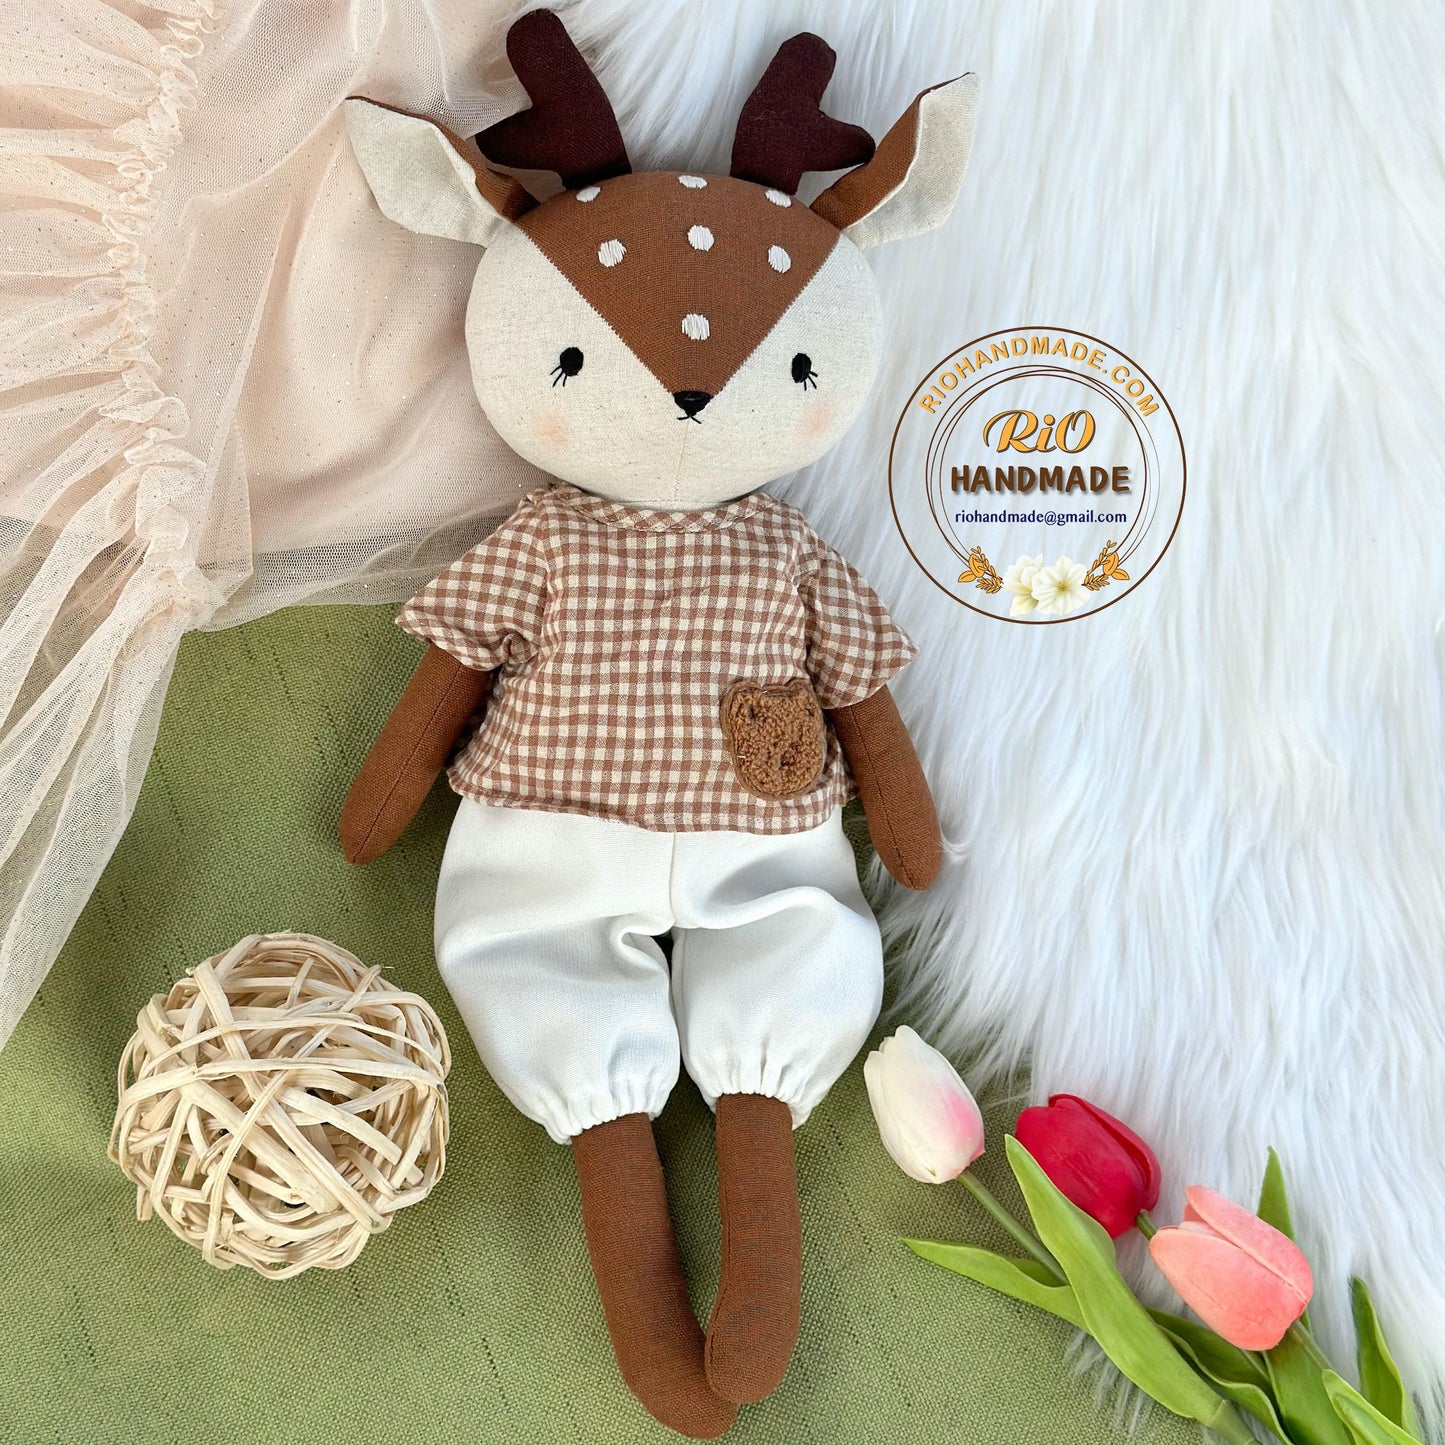 Ready To Ship, Rio Handmade Linen Deer Doll, Nursery Decor Stuffed, Linen Baby Toy, Stuffed Deer Toy For Toddler, Kid, Adult Hobby